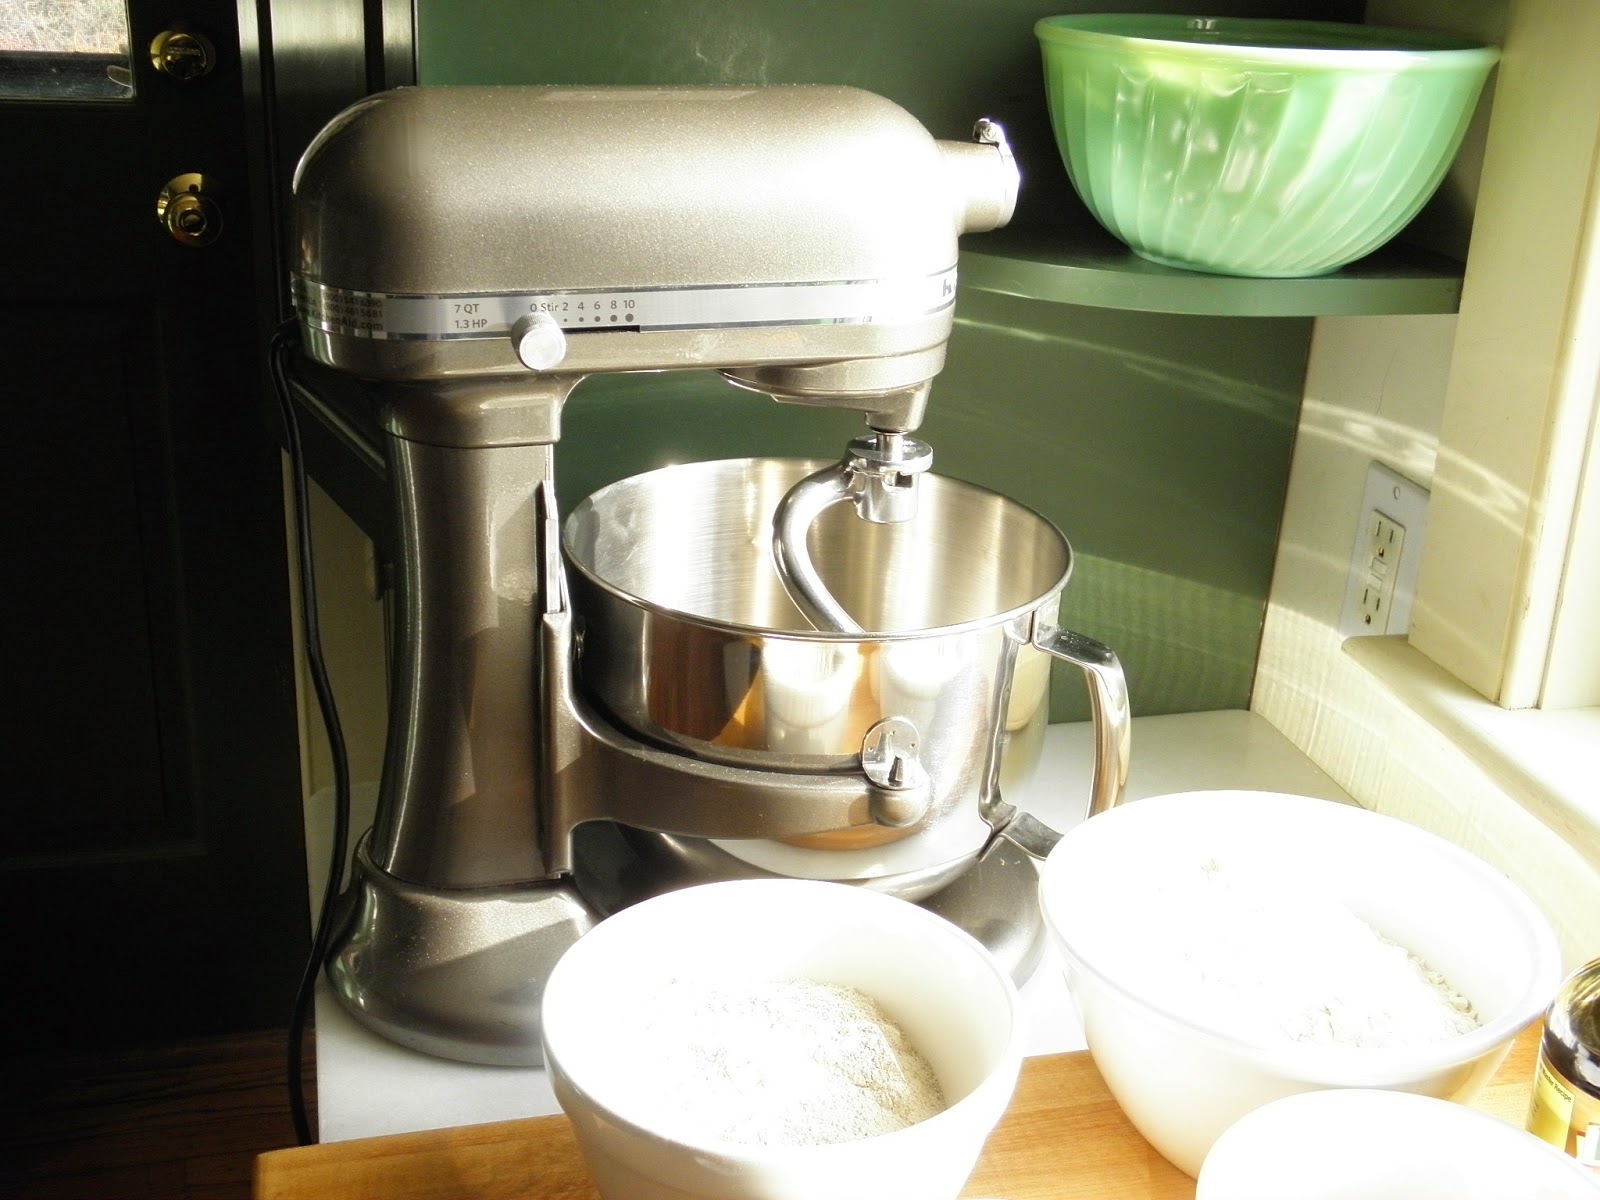 Review of the new KitchenAid 7-Qt. Stand Mixer & a Recipe for